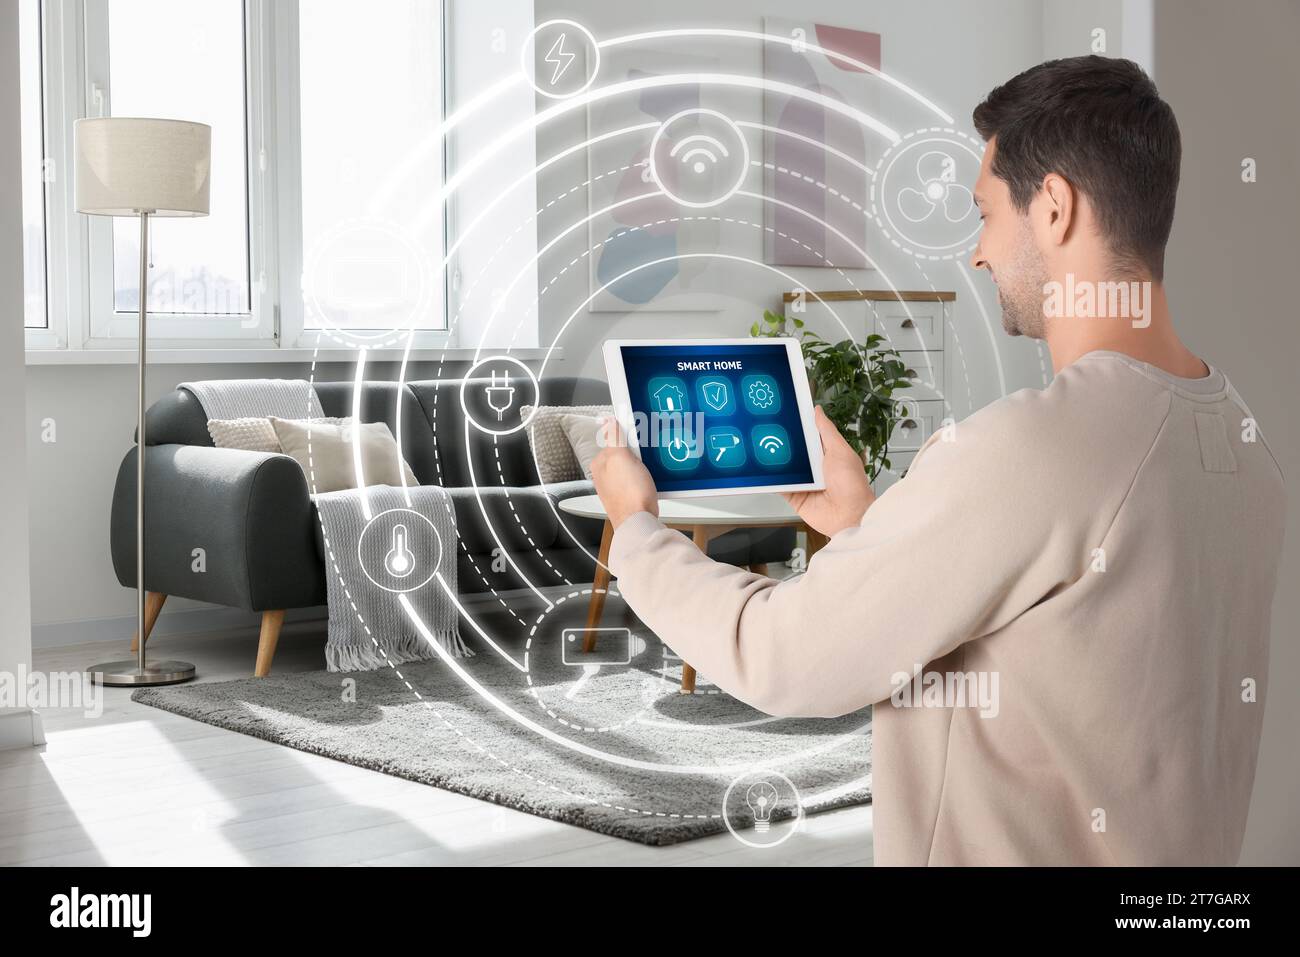 Man using smart home control system via application on tablet indoors. Scheme with icons around device Stock Photo